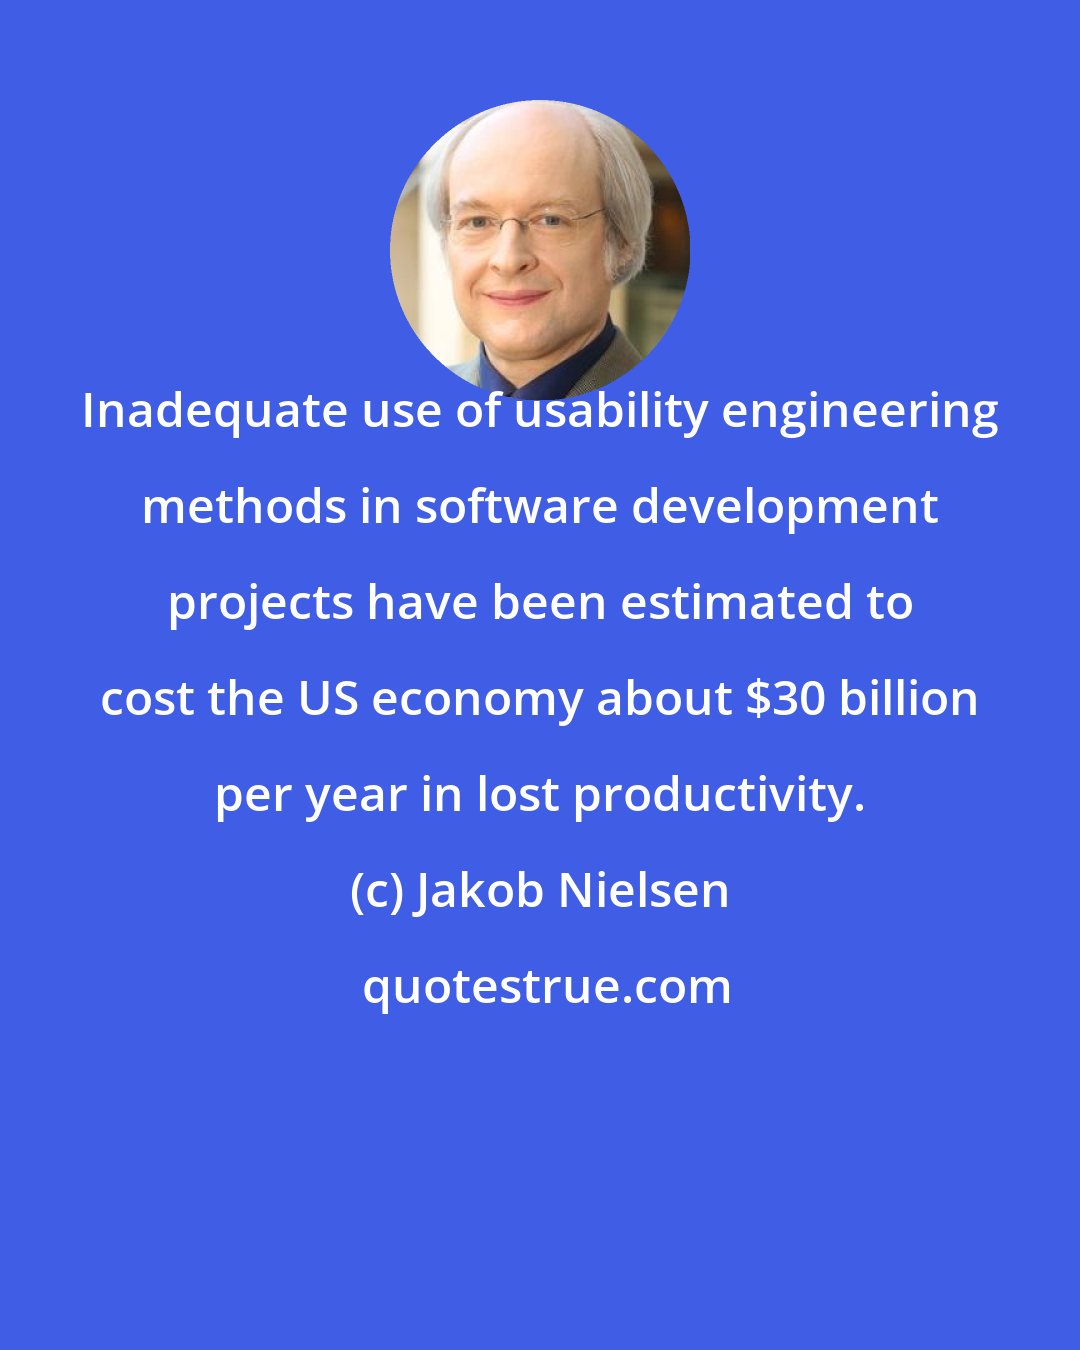 Jakob Nielsen: Inadequate use of usability engineering methods in software development projects have been estimated to cost the US economy about $30 billion per year in lost productivity.